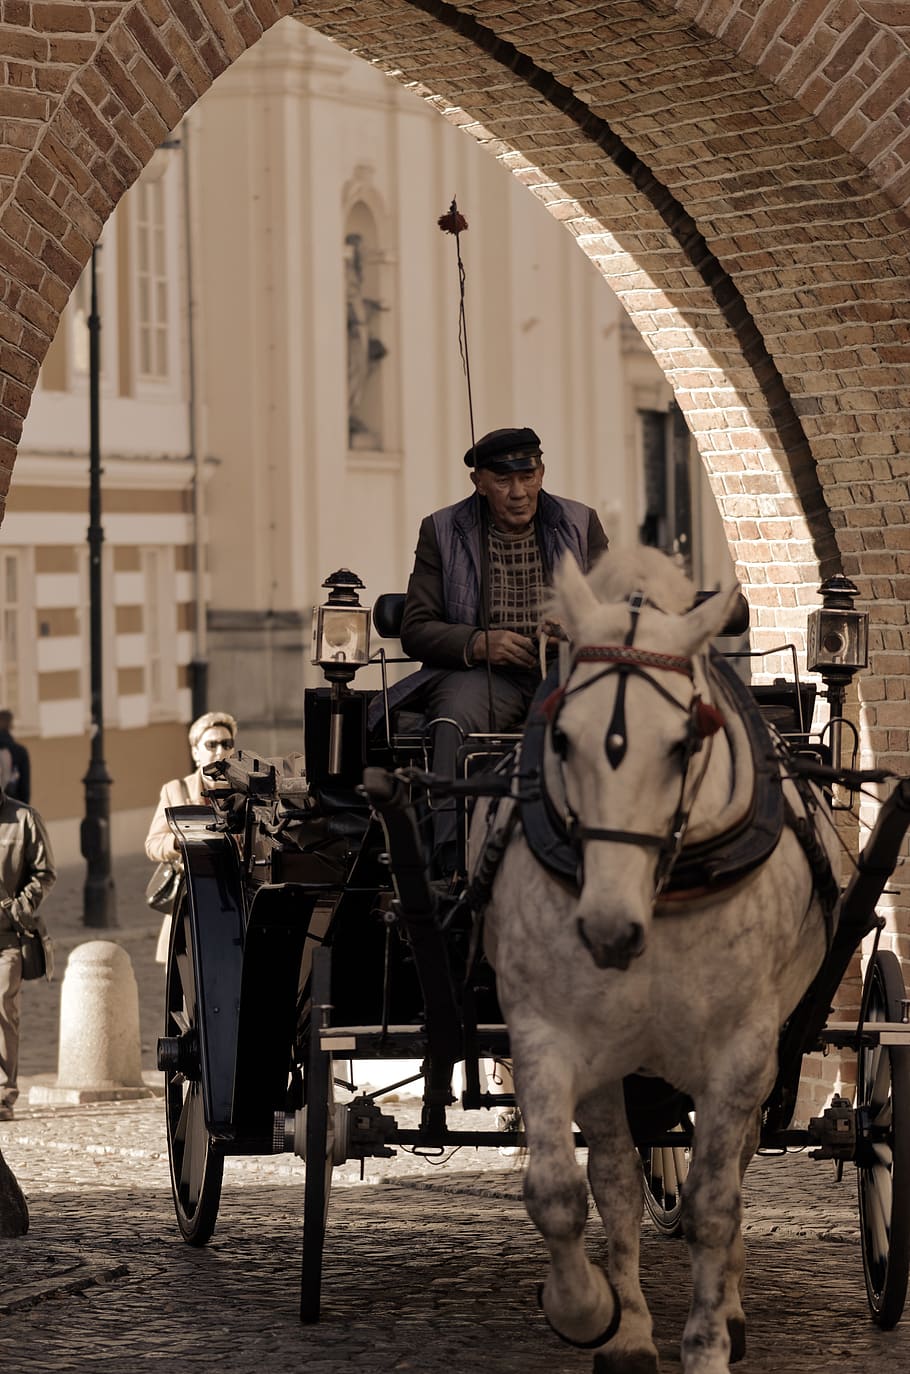 coach, horse, the driver, going, tourism, building, historical, people, tourists, bricks